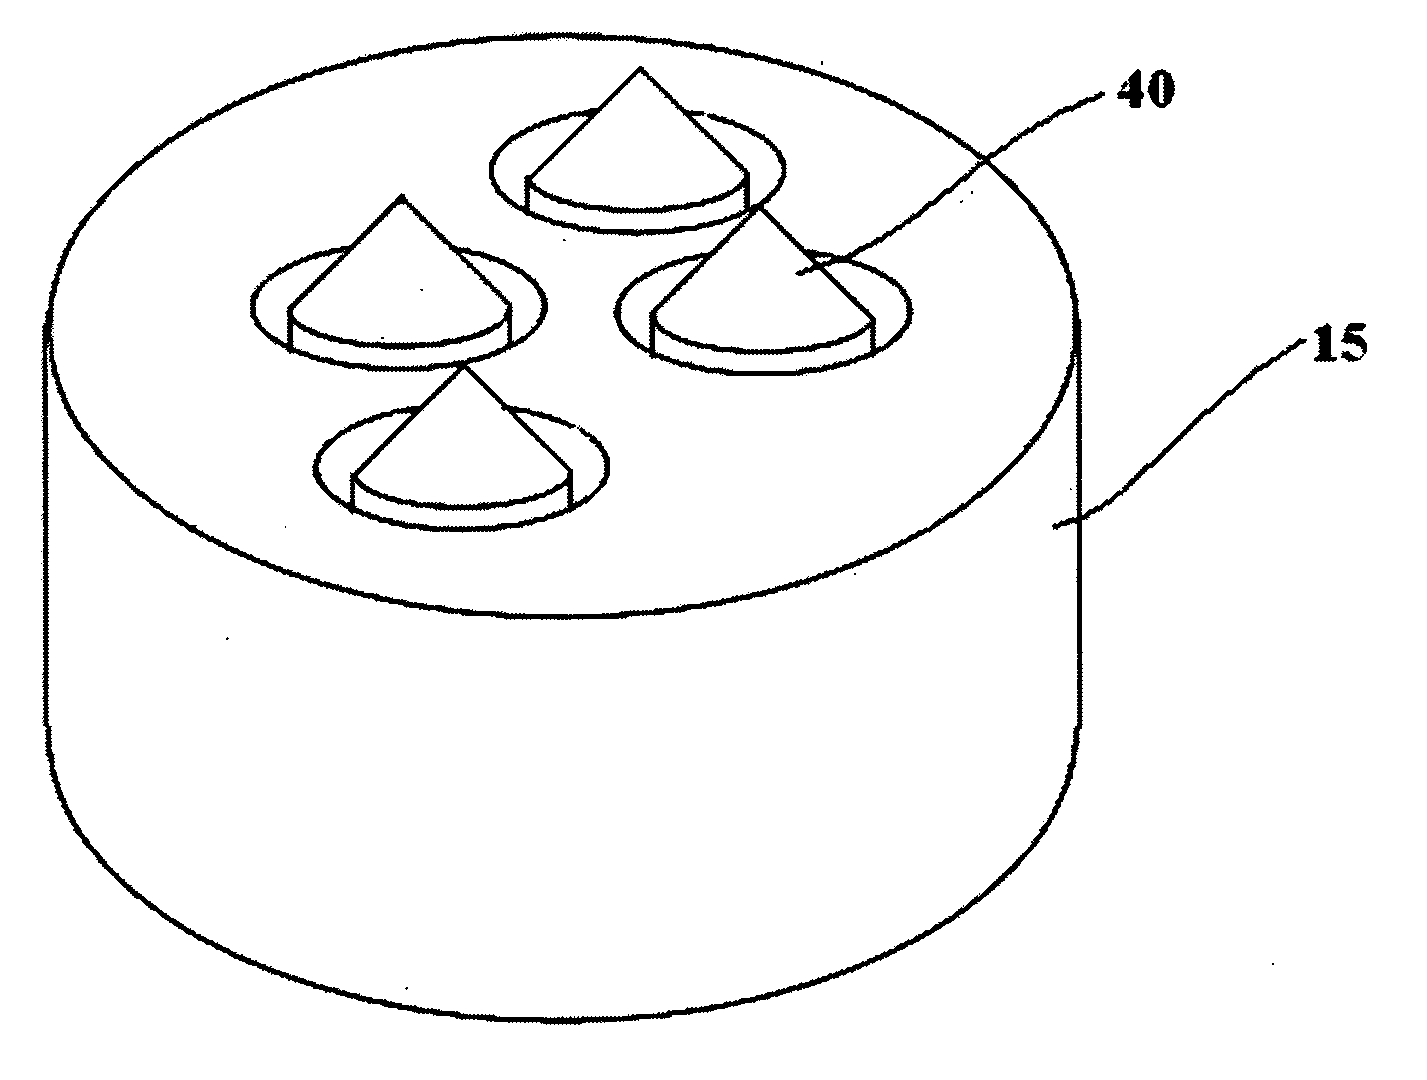 Finger-operated input device